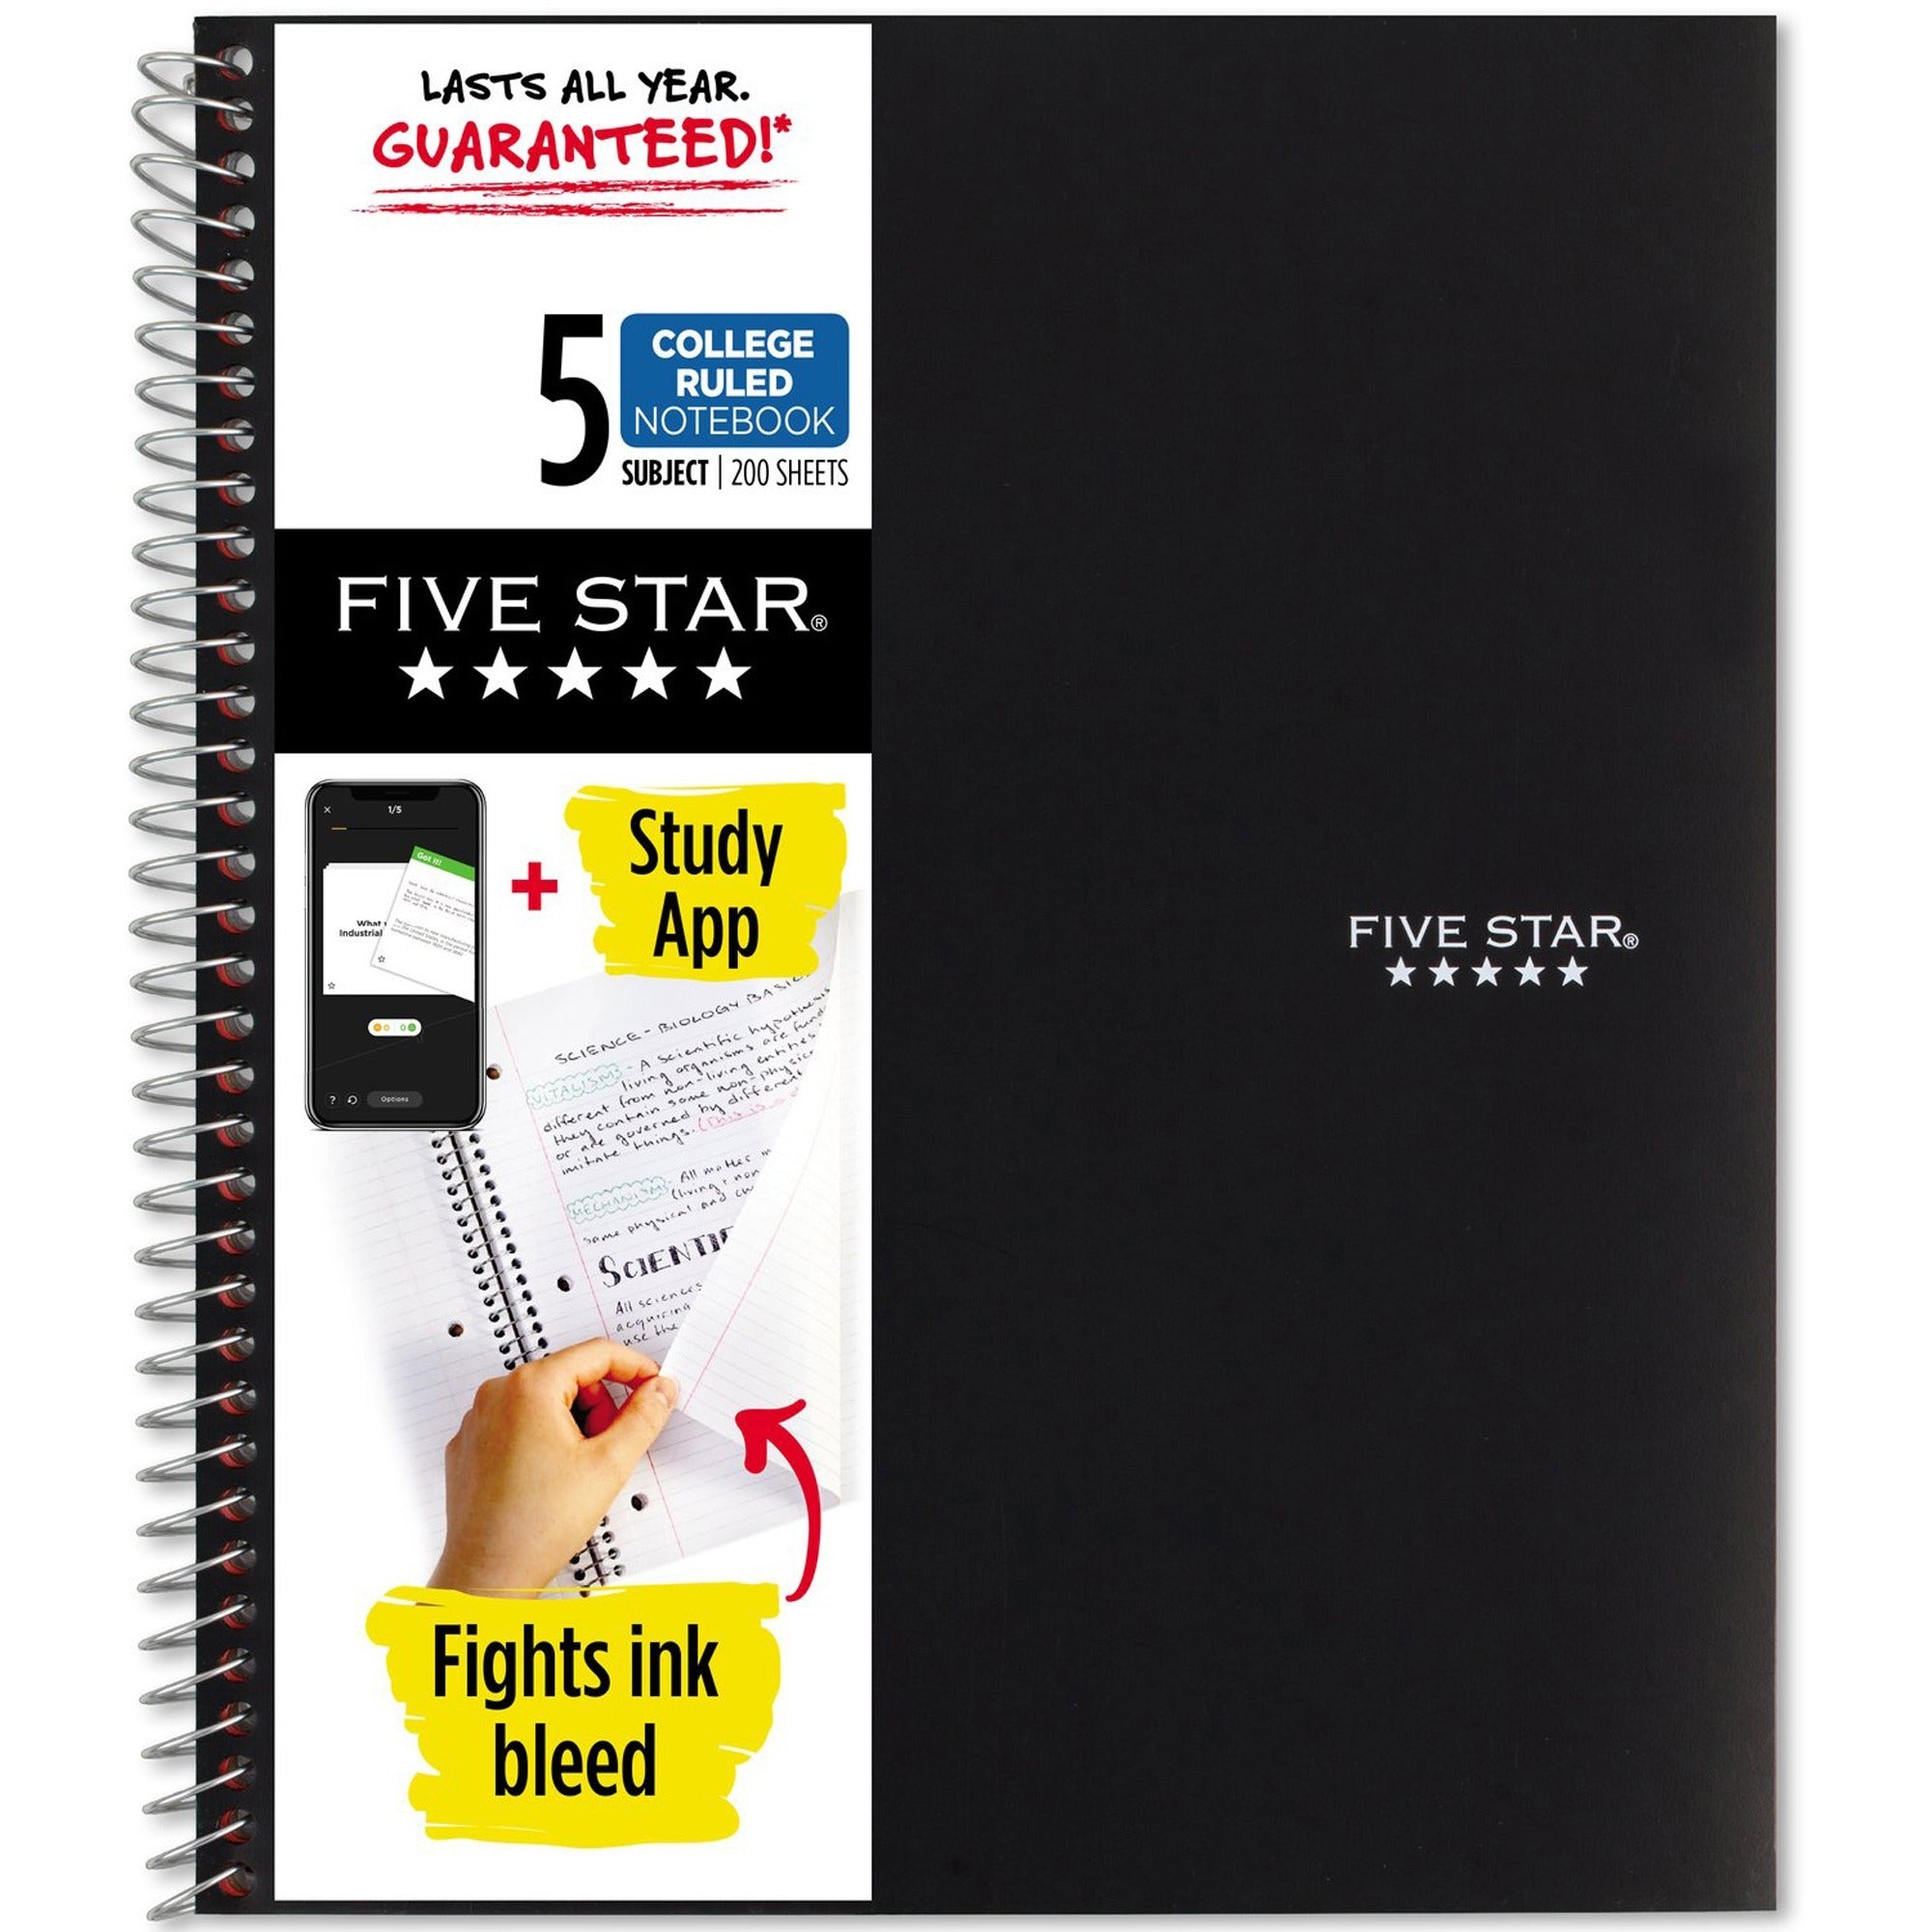 five-star-notebook-5-subjects-200-sheets-wire-bound-college-ruled-3-holes-letter-8-1-2-x-11-black-cover-bleed-resistant-pocket-perforated-water-resistant-spiral-lock-acid-free-pocket-divider-1-each_mea72081 - 1